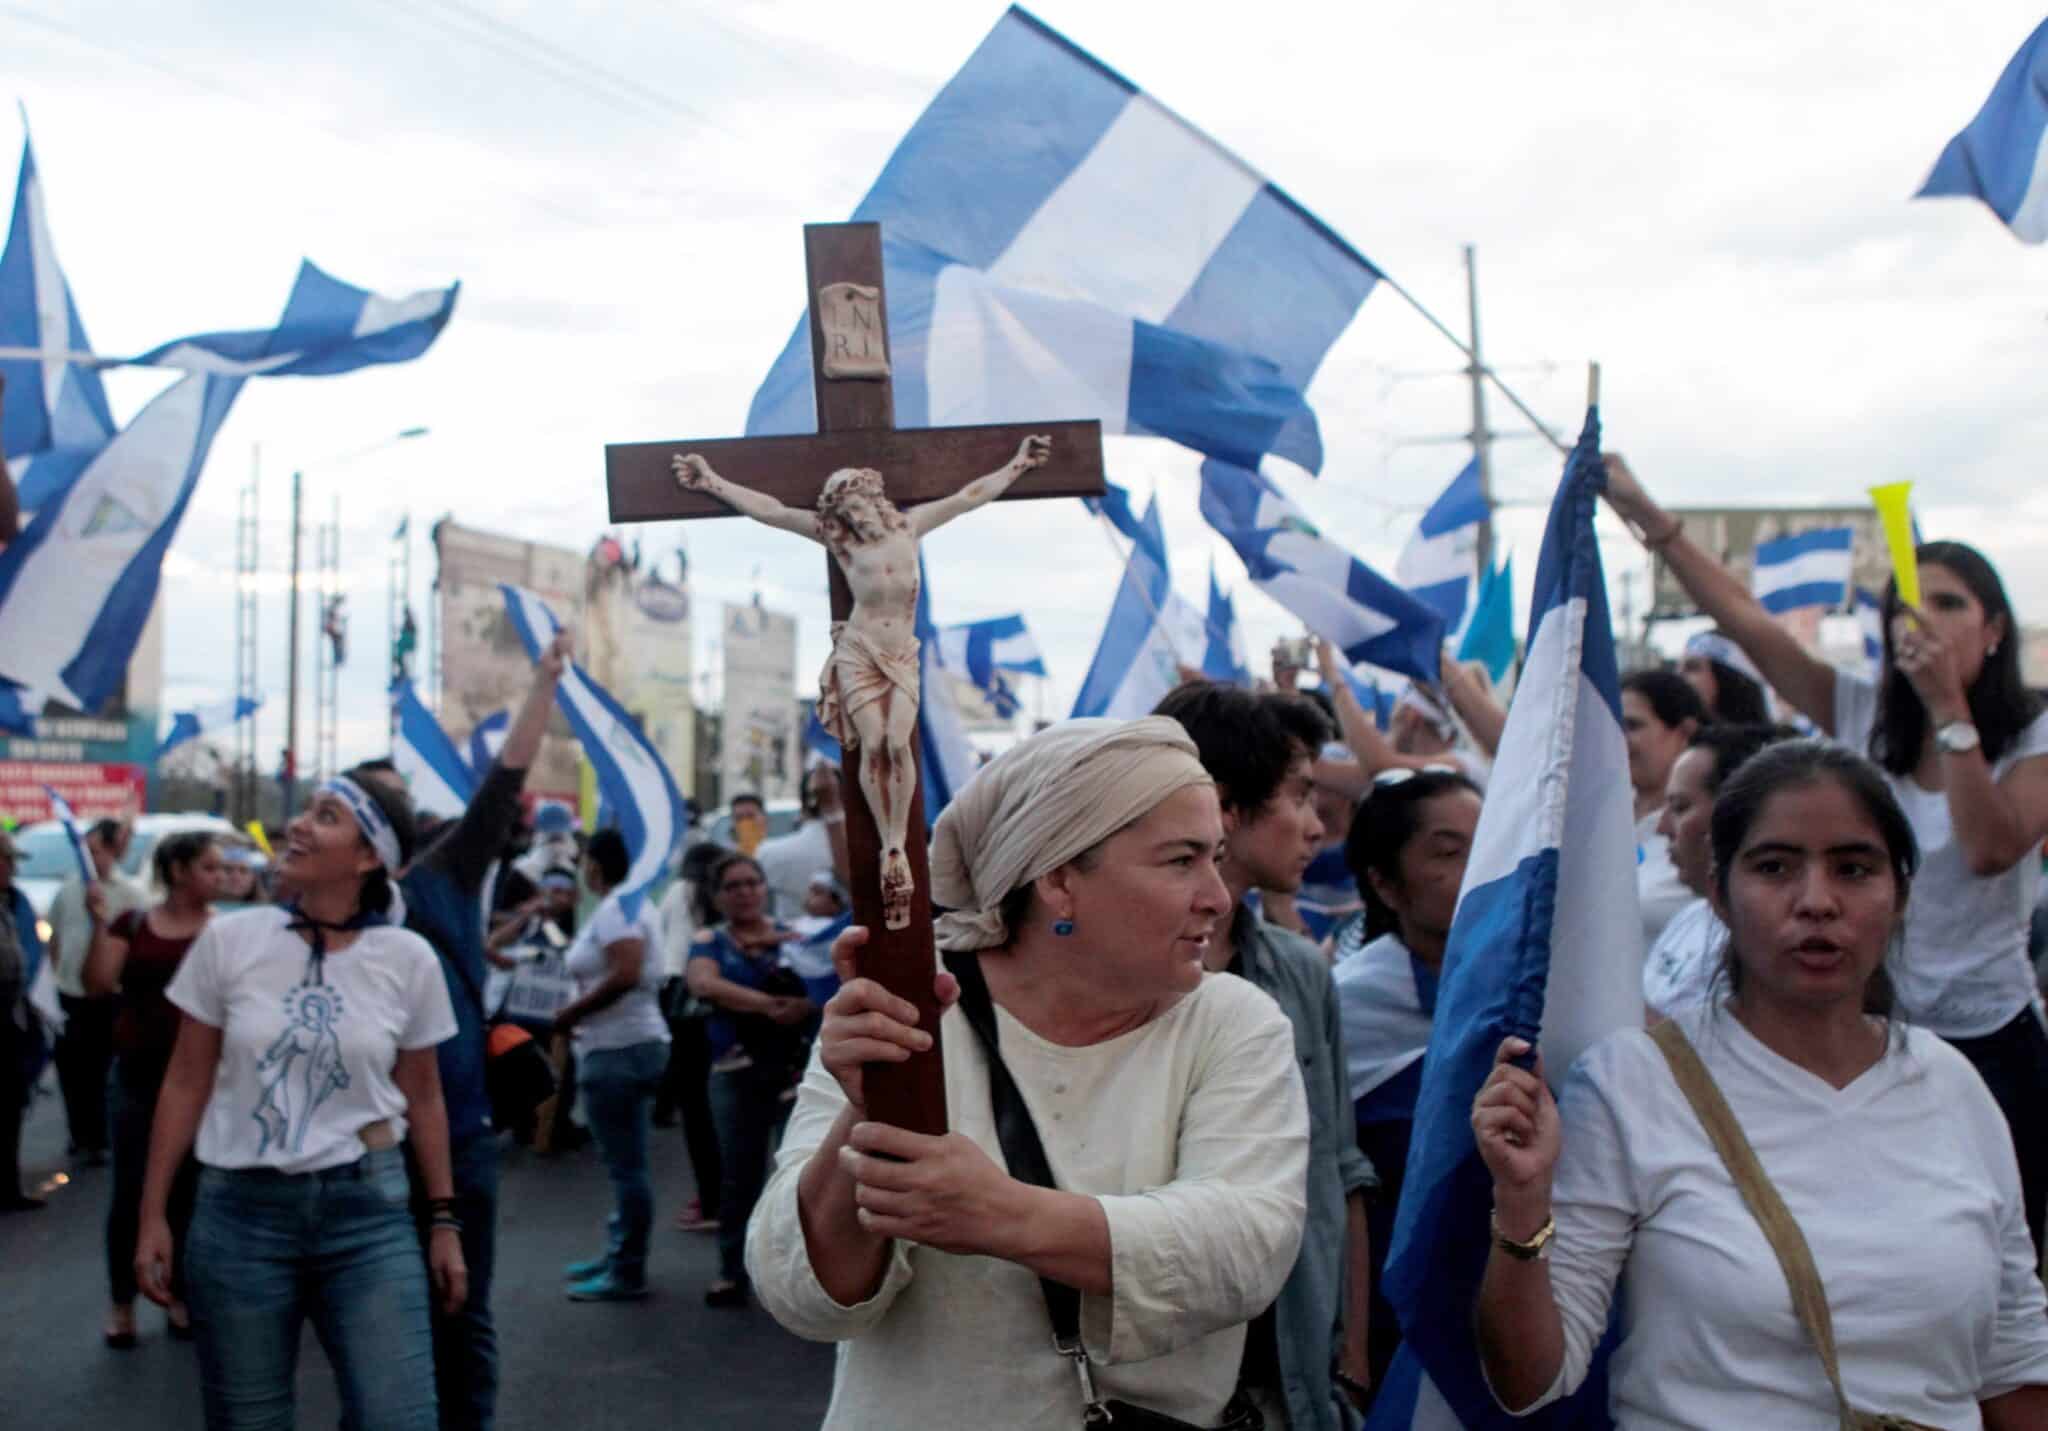 A demonstrator holds a crucifix during a protest against Nicaraguan President Daniel Ortega's government in Managua May 15, 2018. (OSV News photo/Oswaldo Rivas, Reuters)